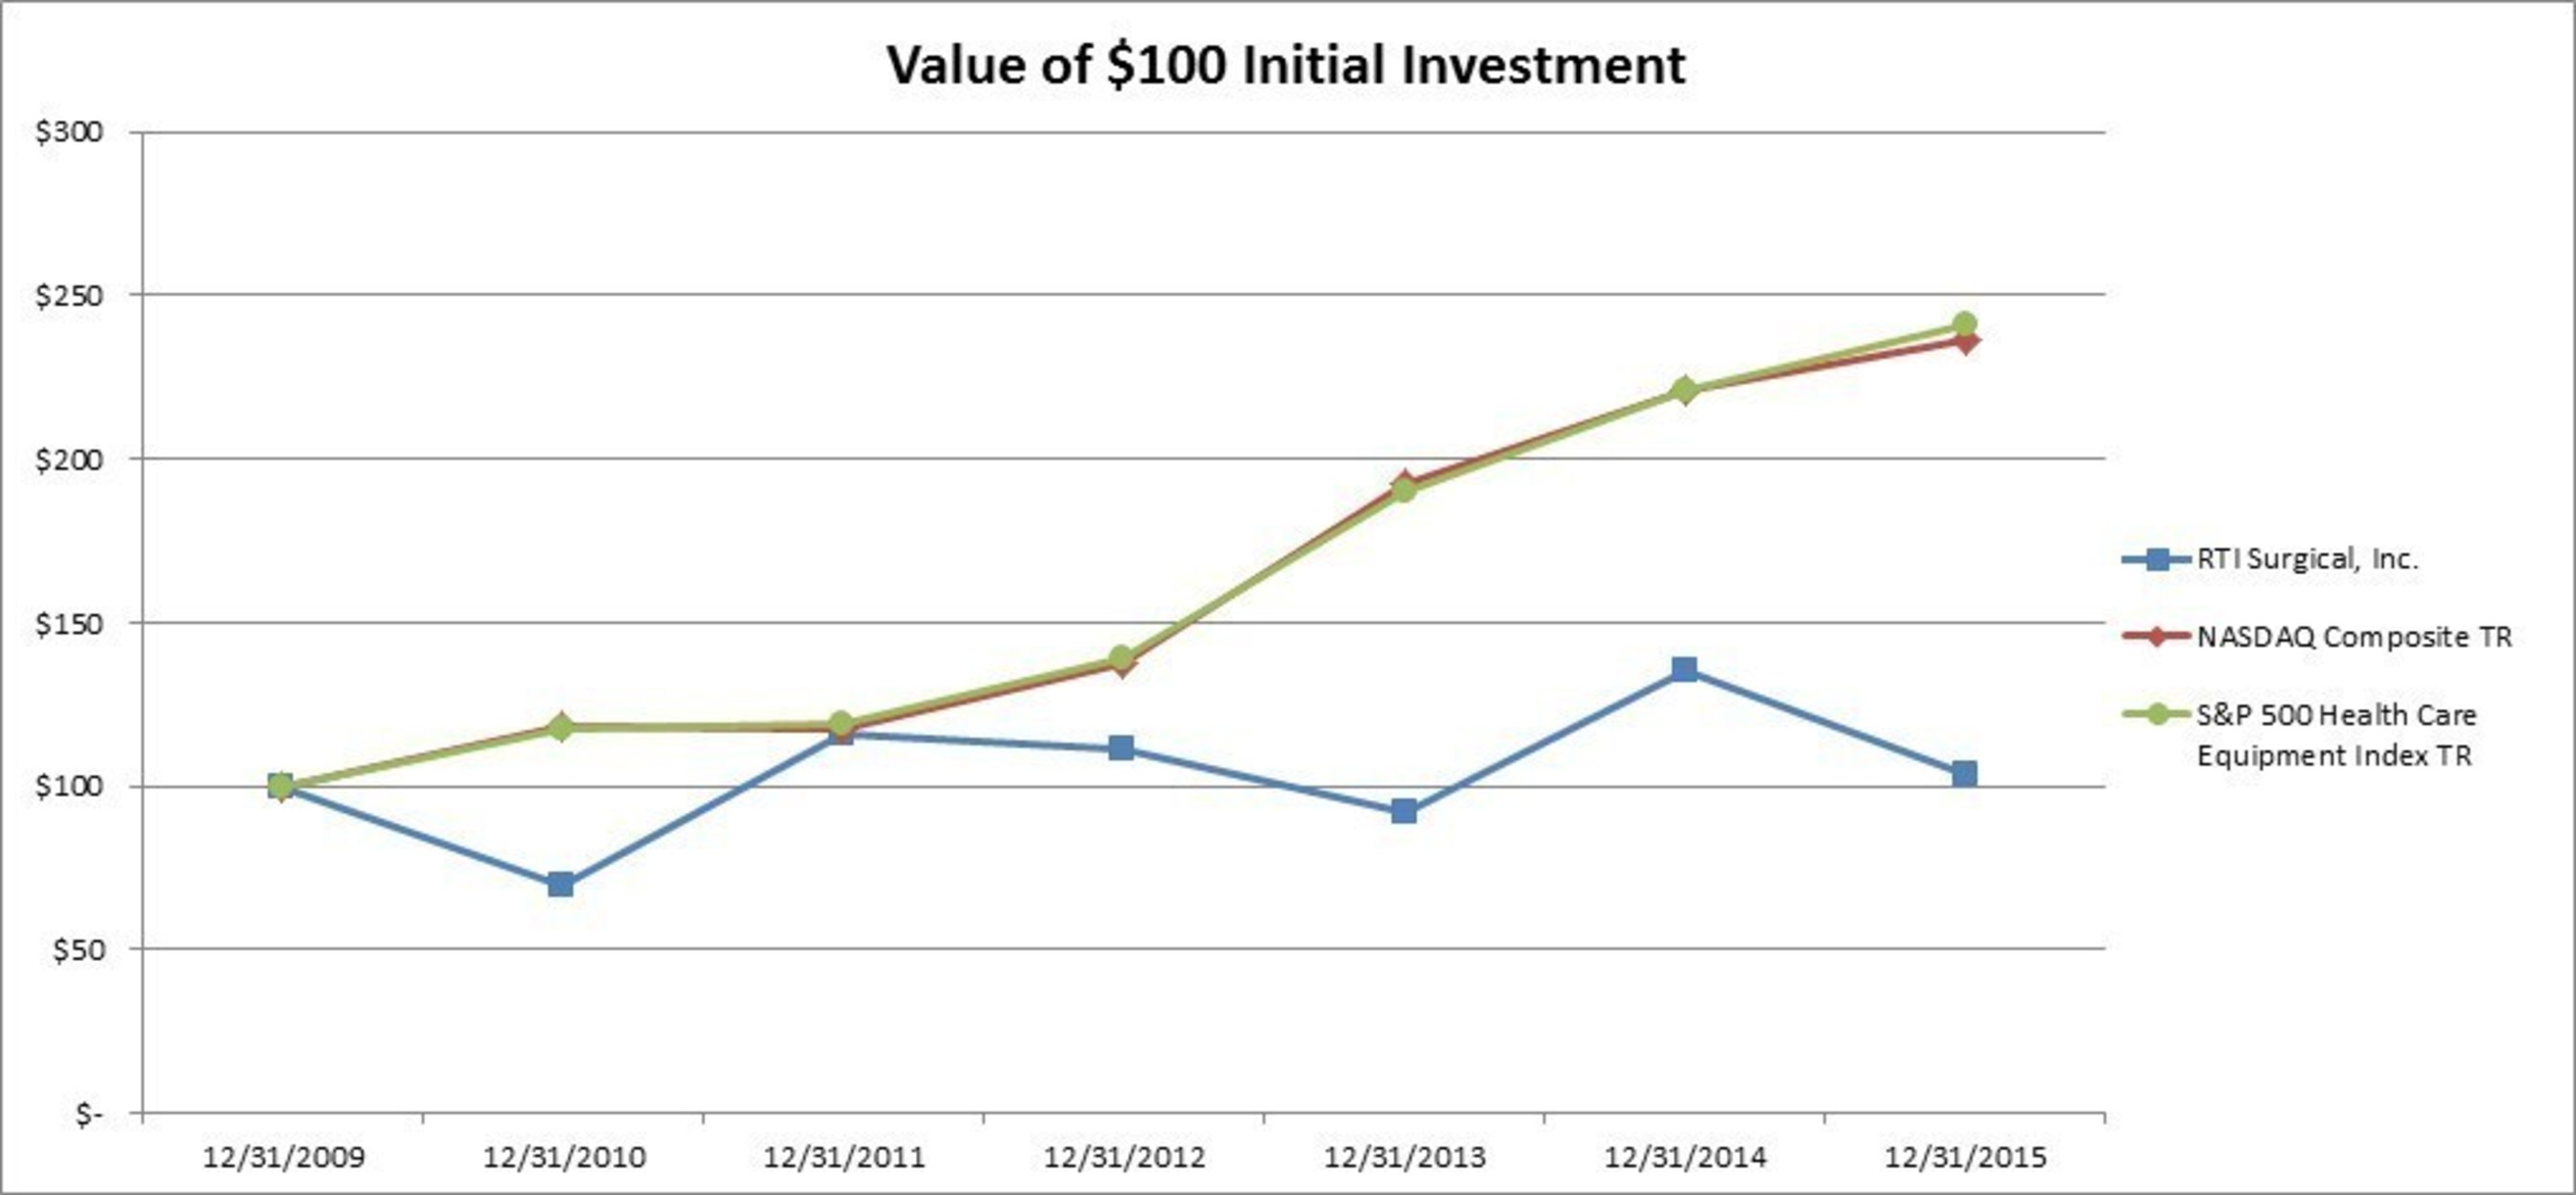 Value of $100 Initial Investment